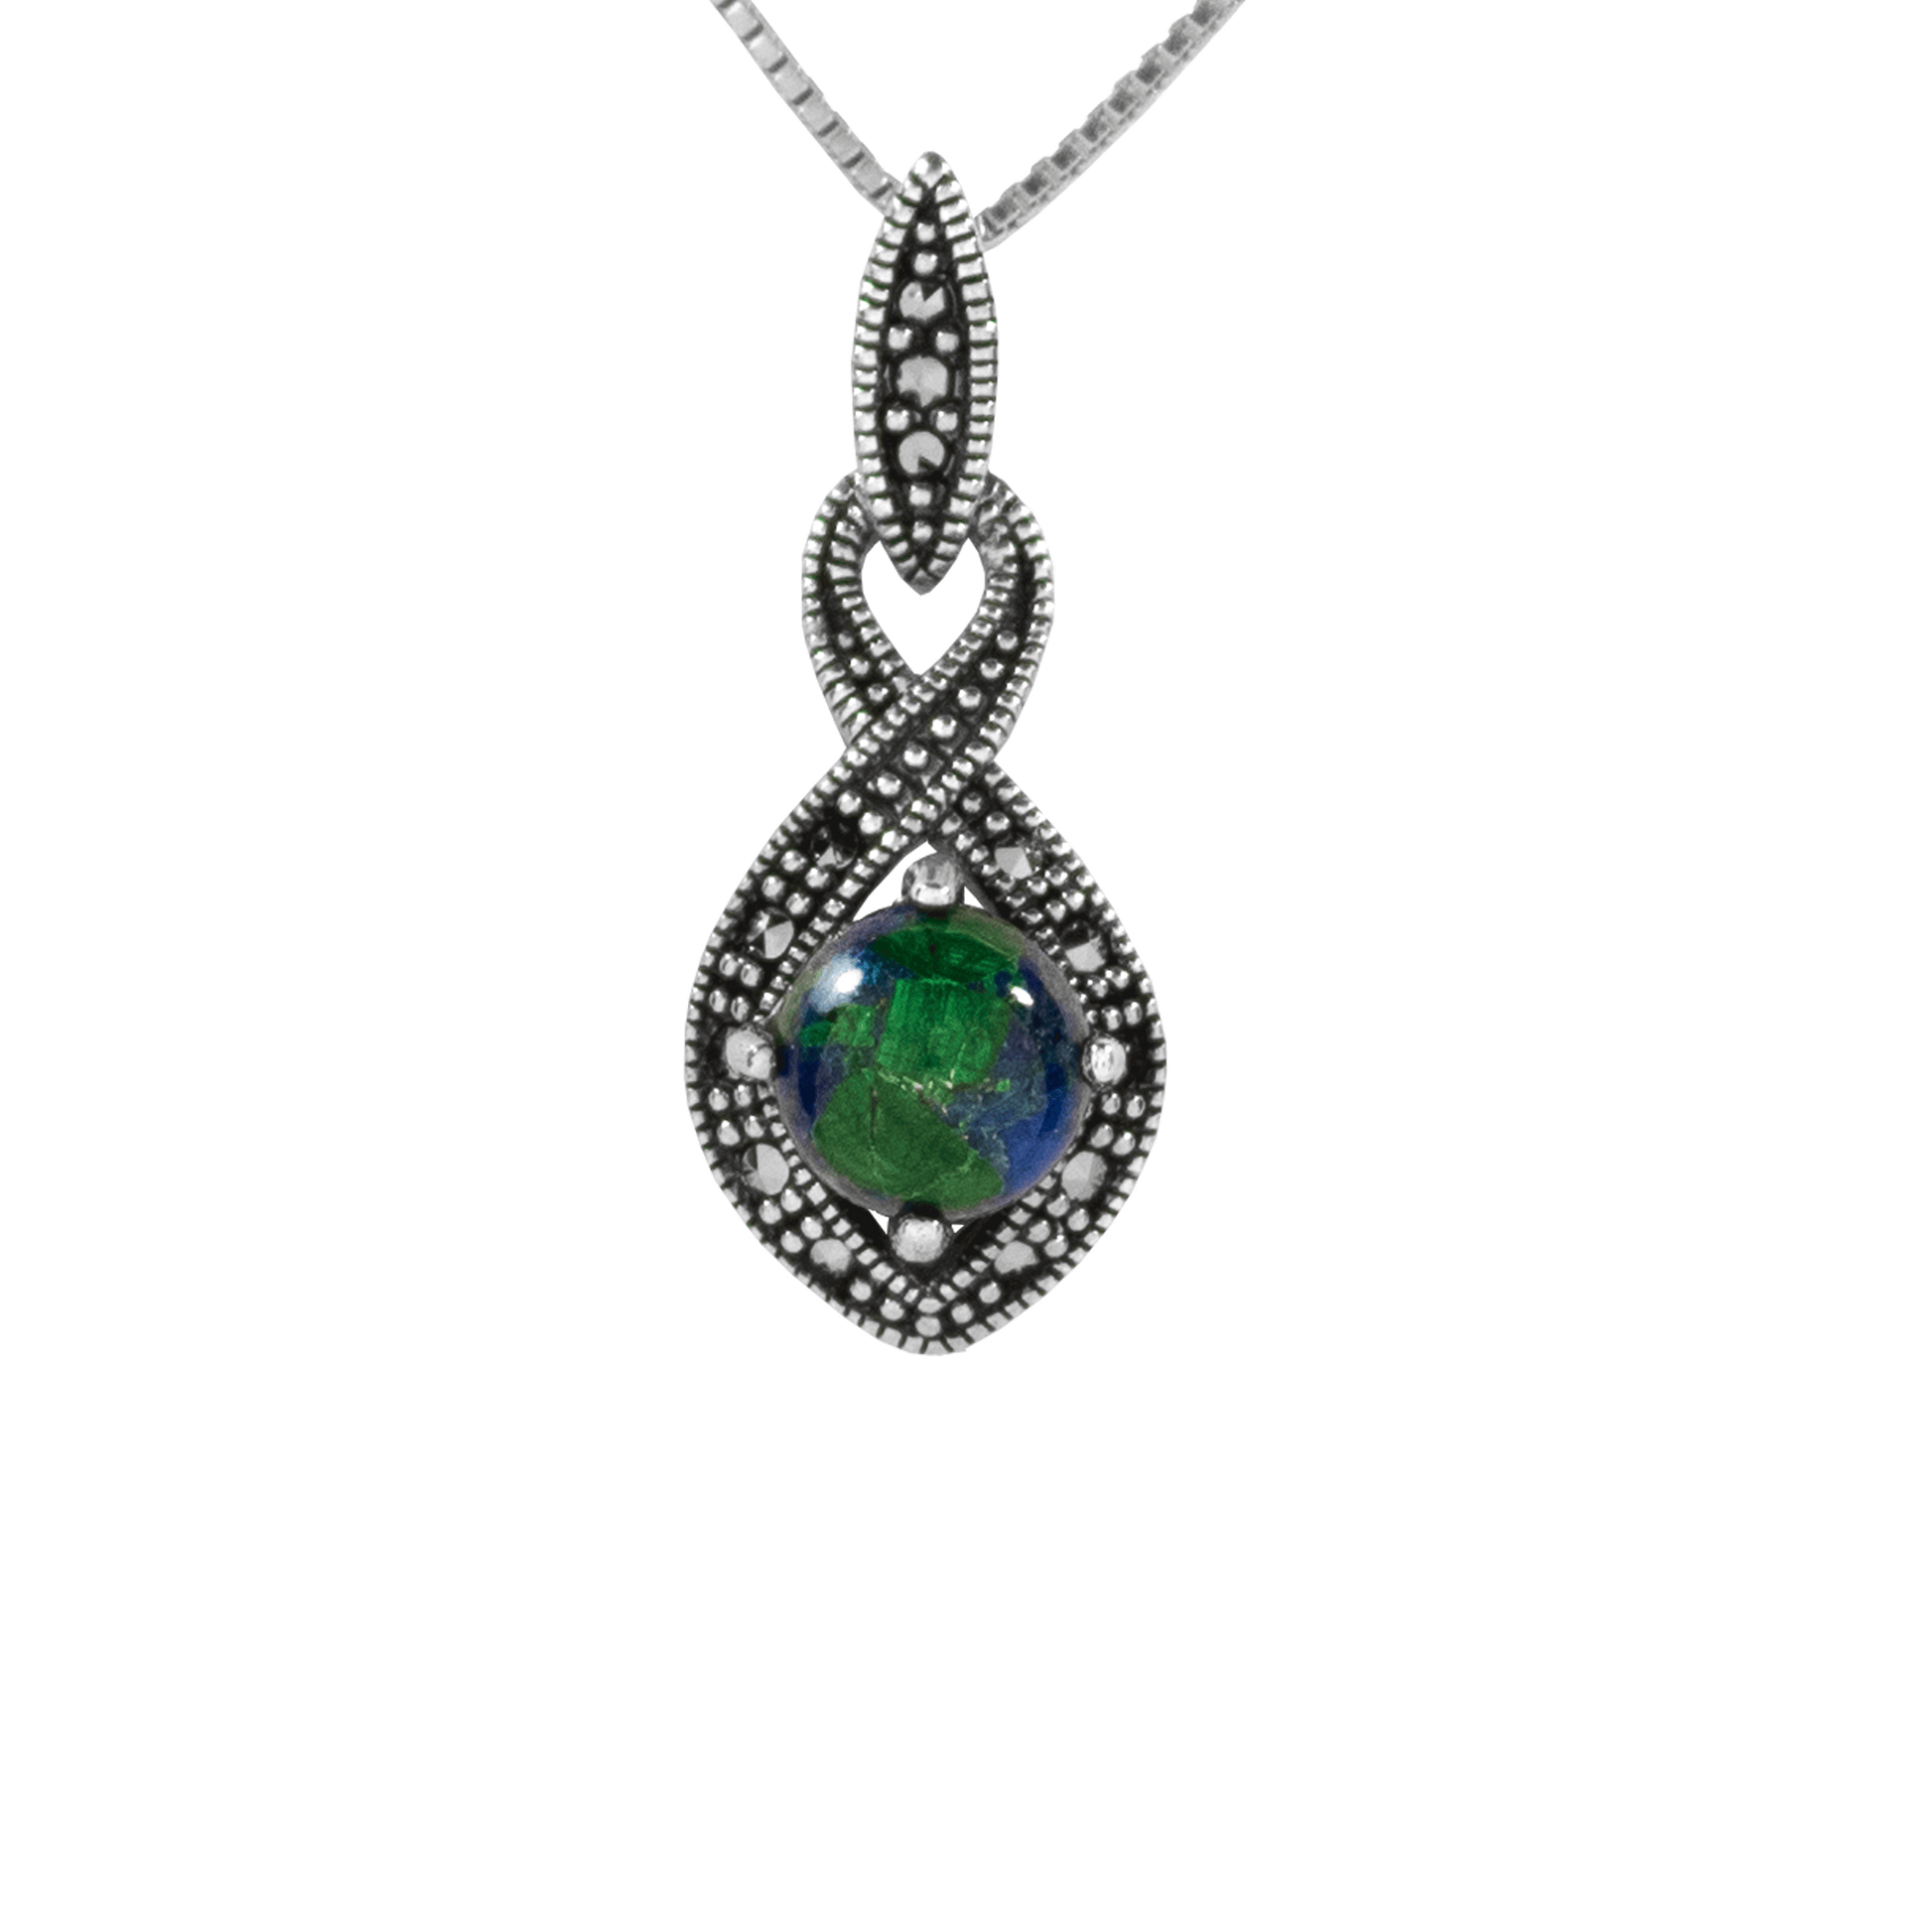 Beautiful Eilat Stone held in the middle of a Marcasite Infinity Pendant on a sterling silver chain.